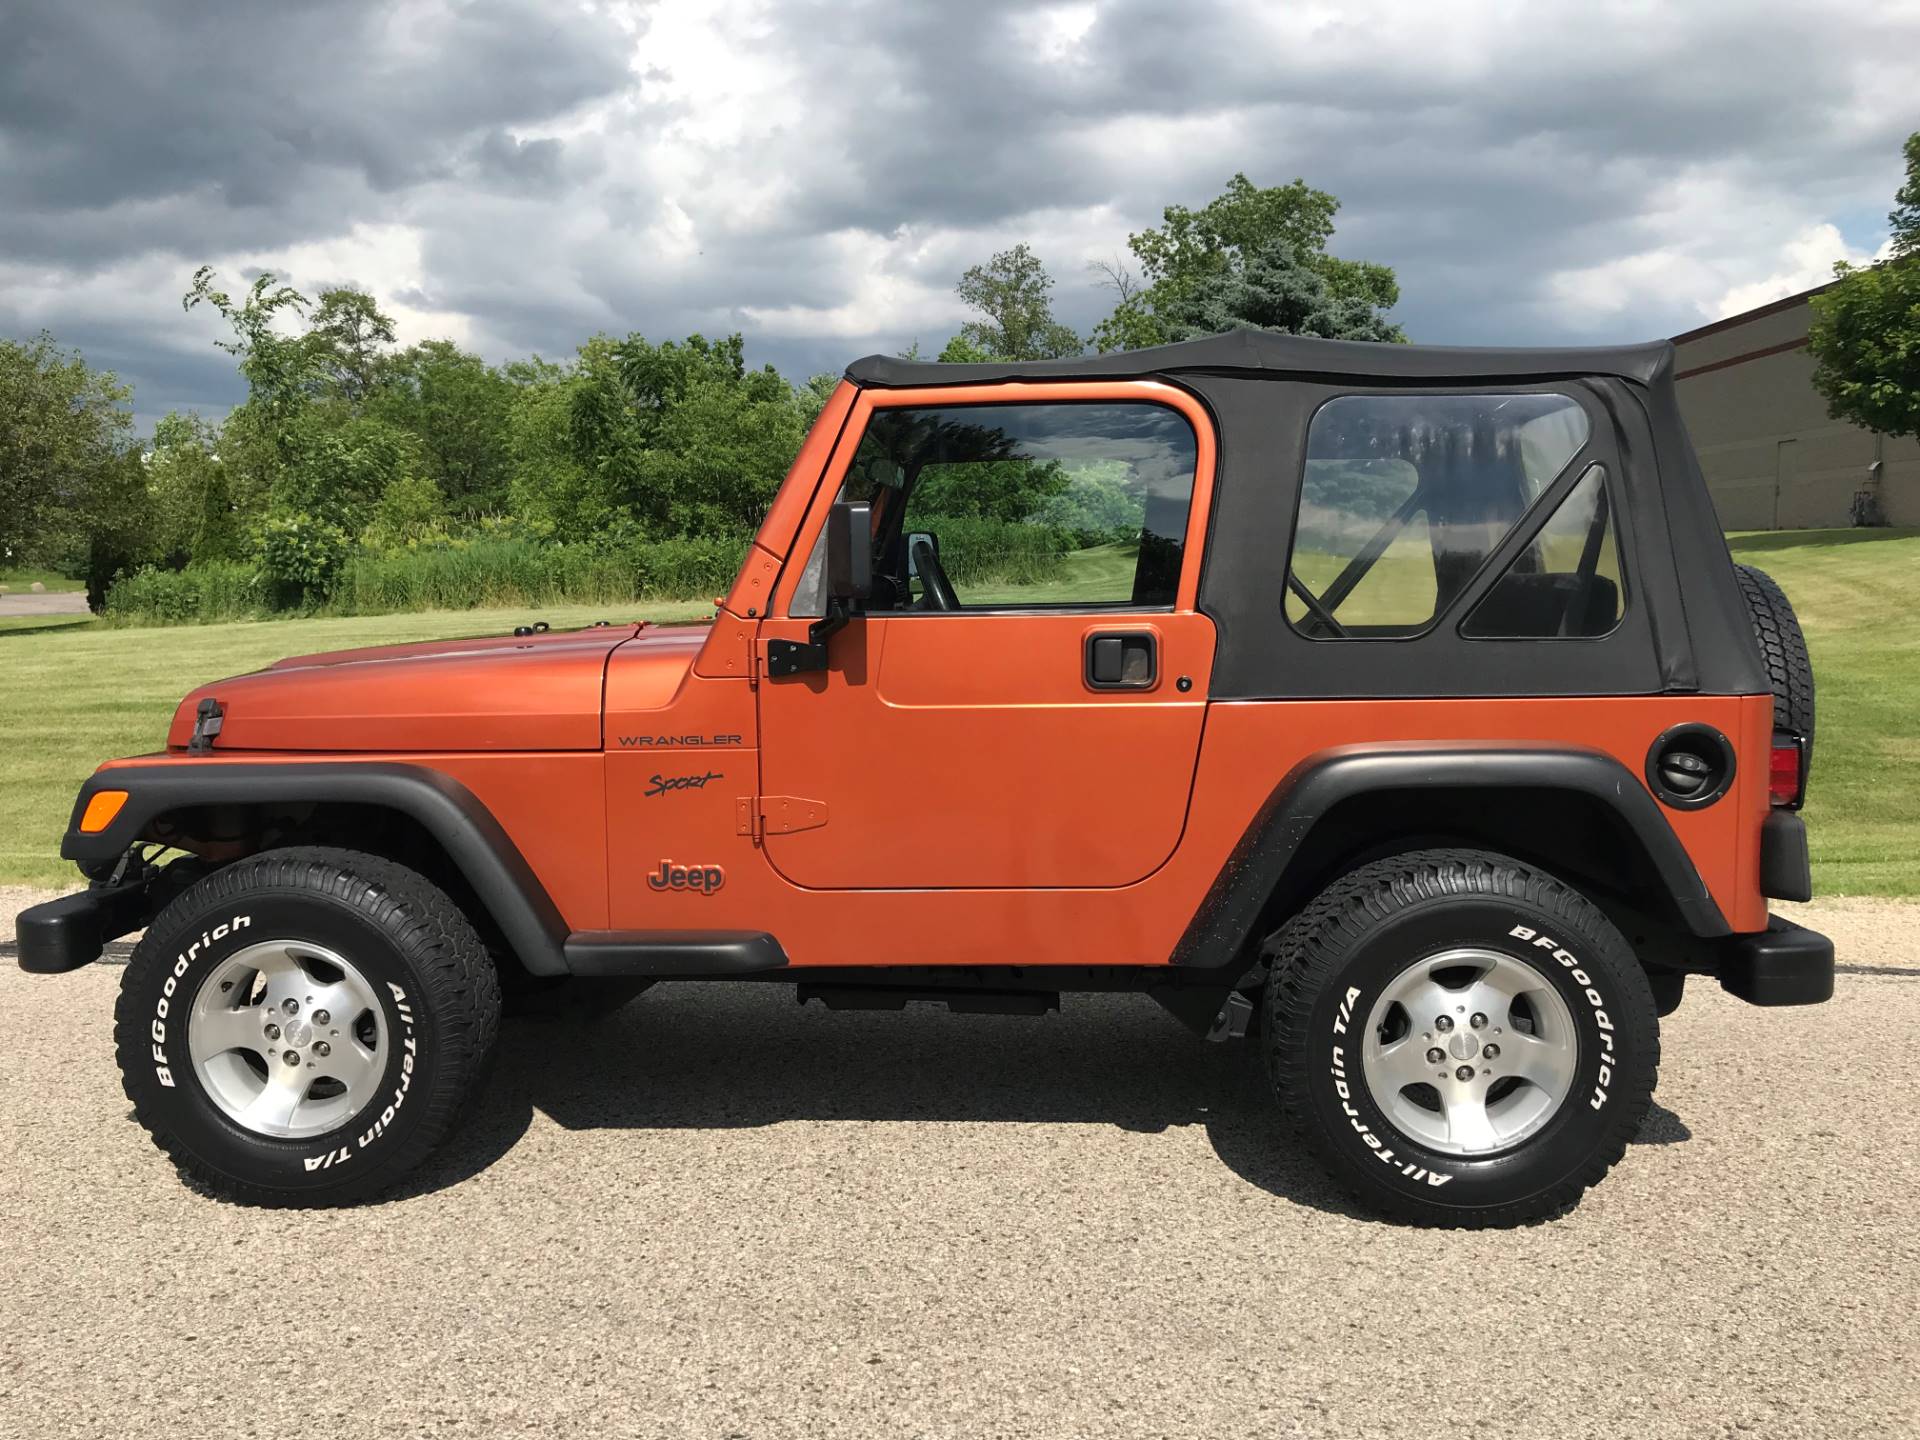 Used 2002 Jeep Wrangler Sport | Automobile in Big Bend WI | 4035 Amber Fire